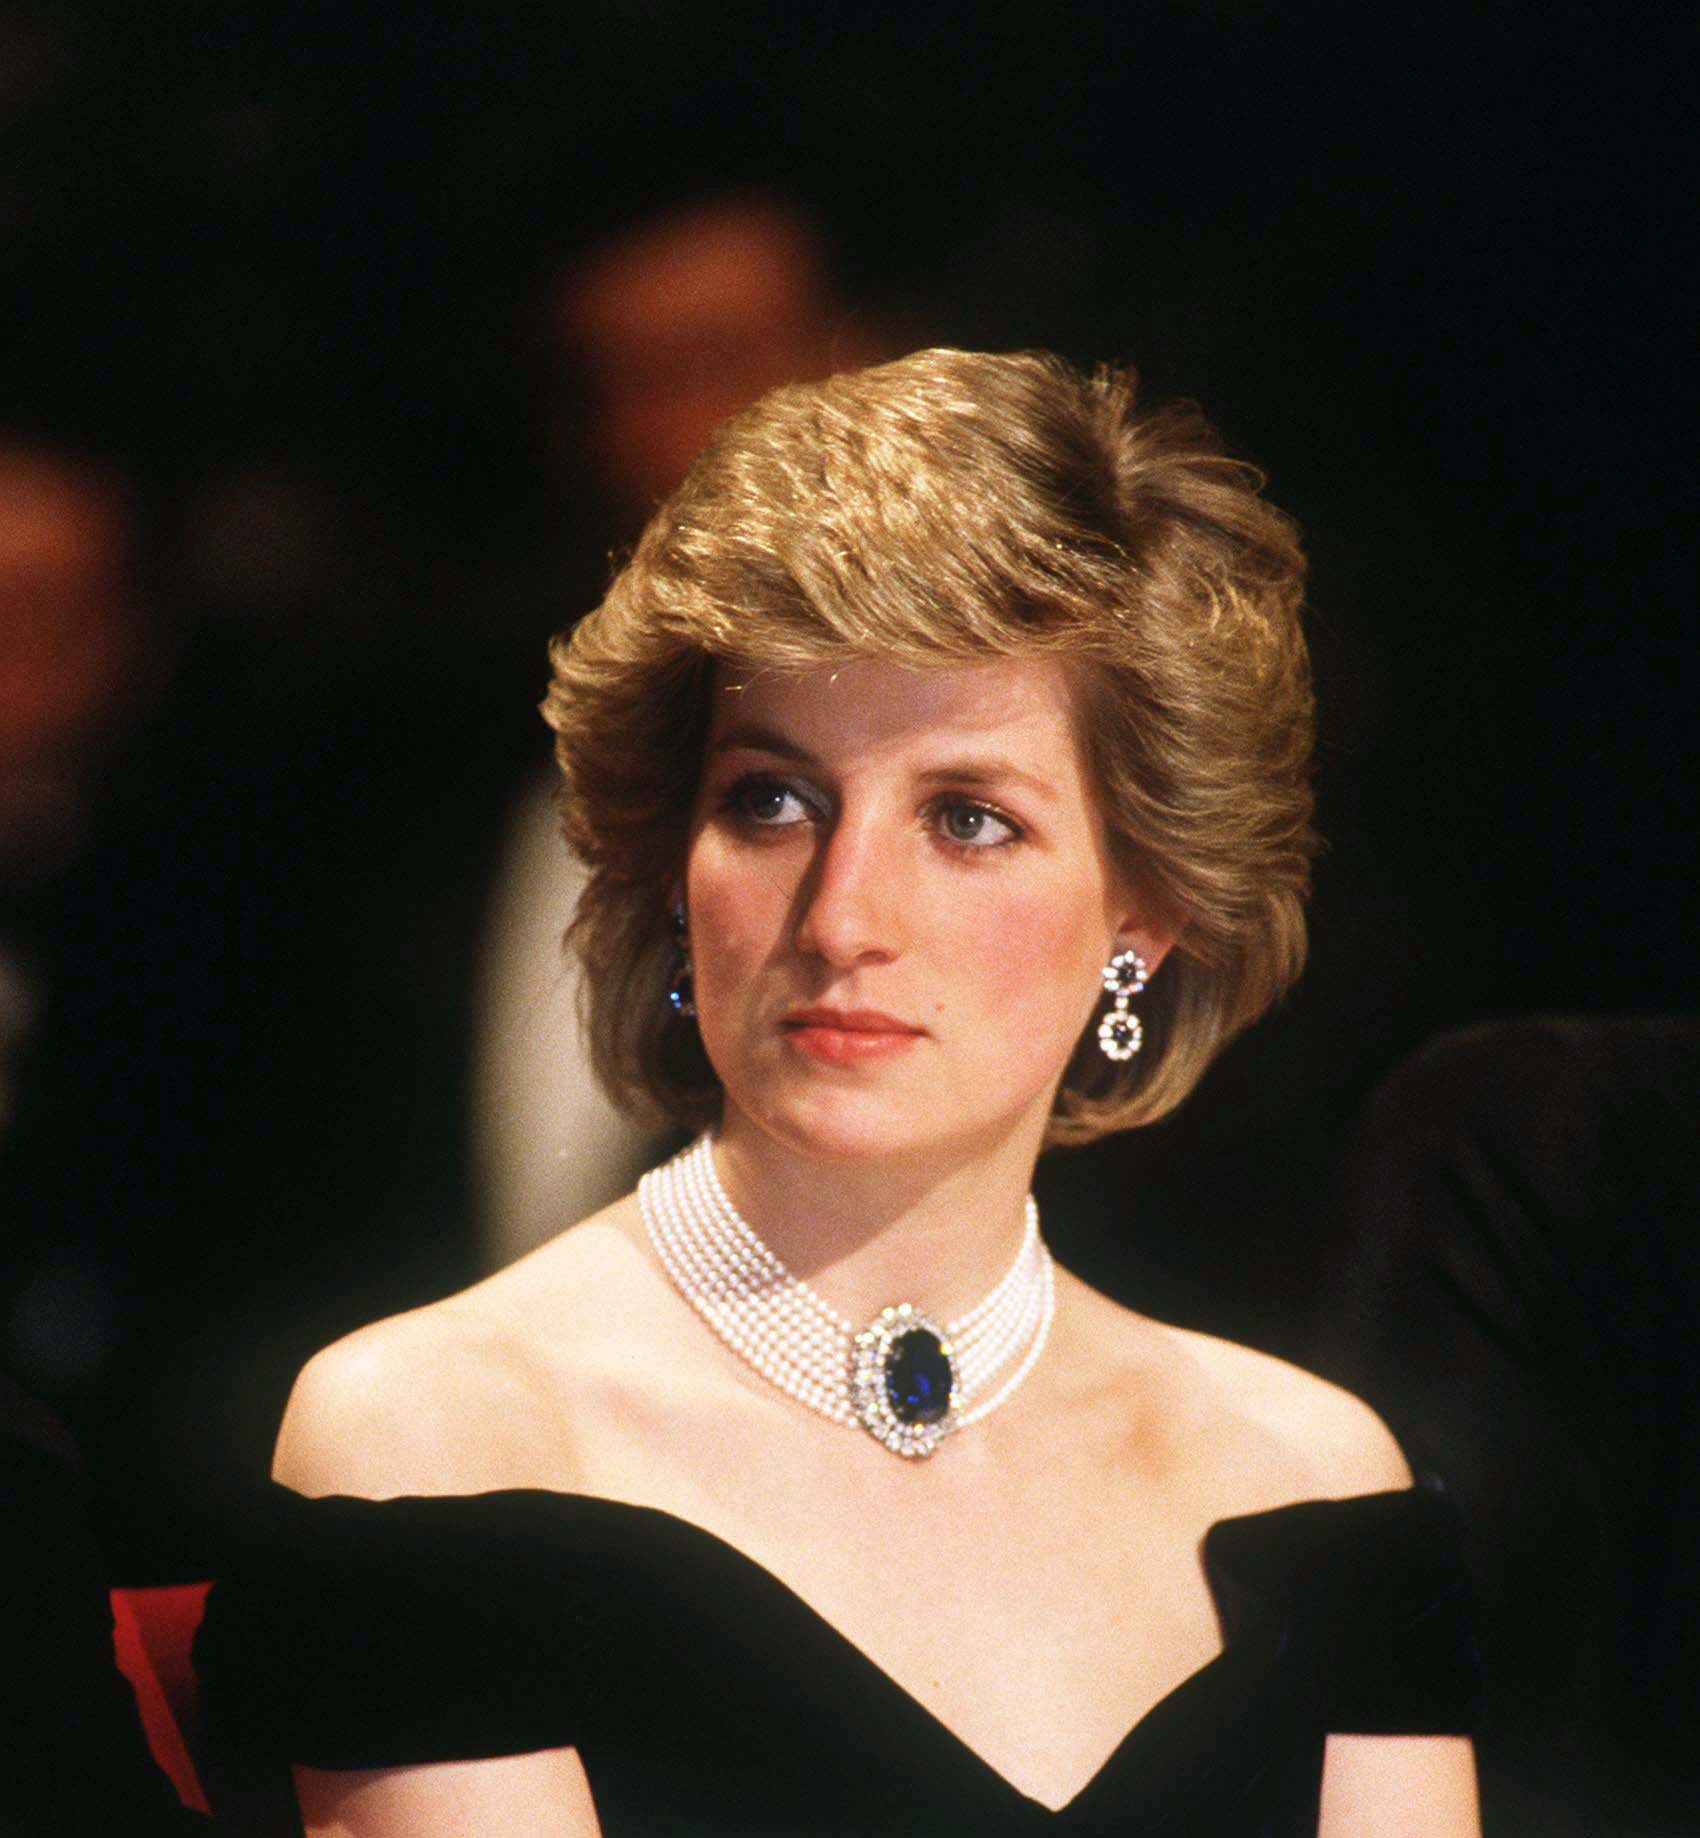 Diana looked glamorous sporting her signature brushed-up blowout.